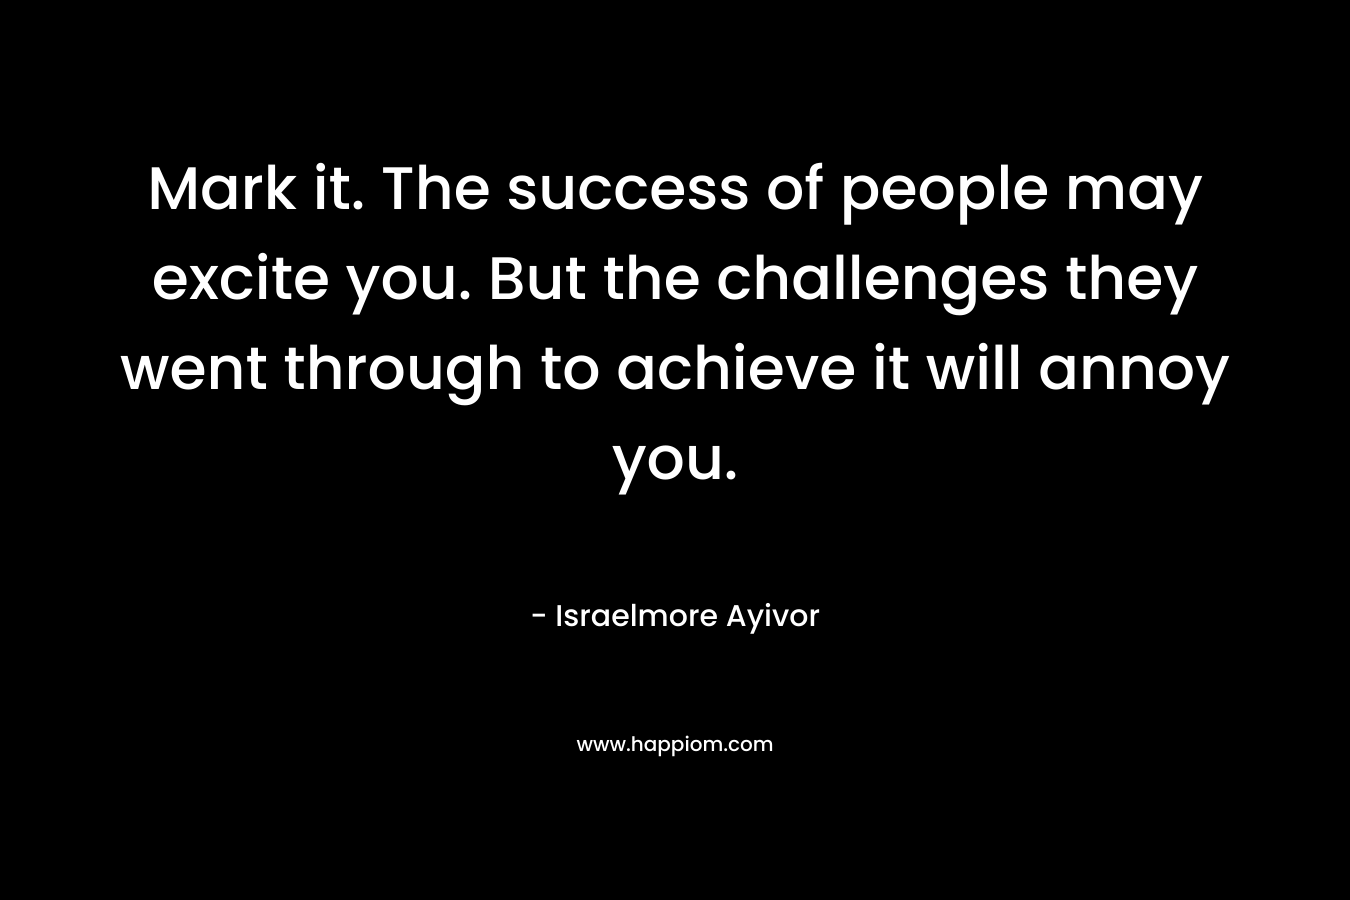 Mark it. The success of people may excite you. But the challenges they went through to achieve it will annoy you. – Israelmore Ayivor